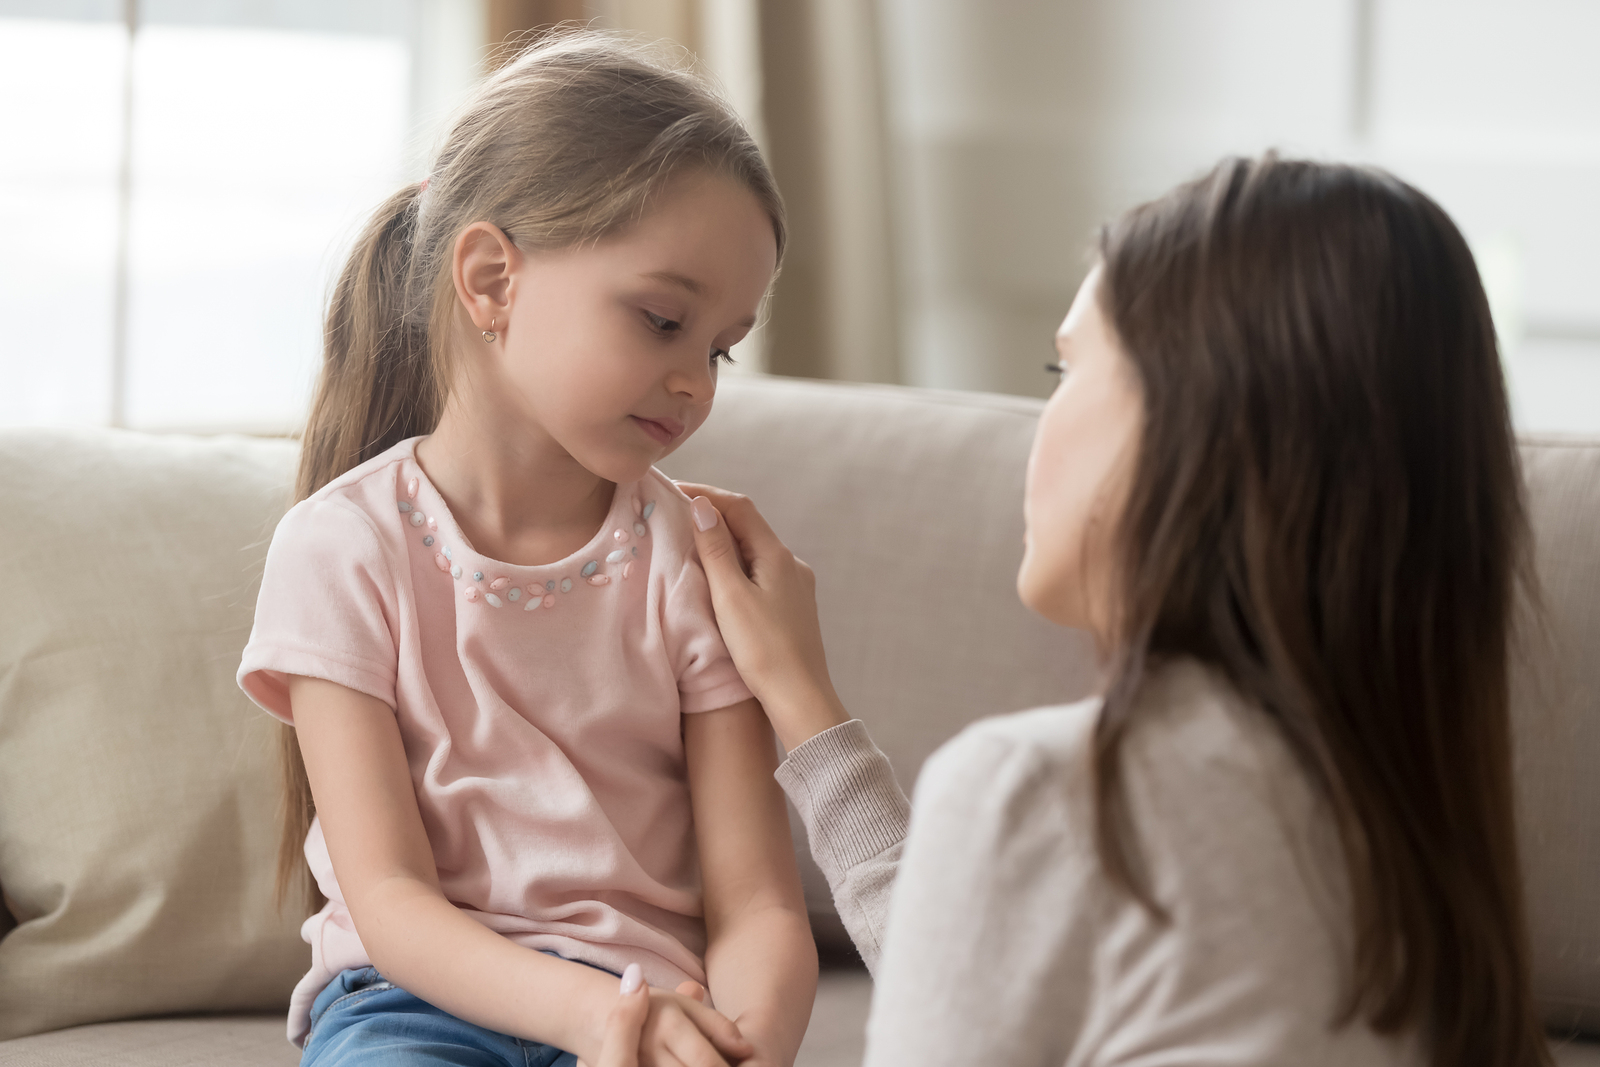 How to Talk to My Child About Their Facial Paralysis Condition